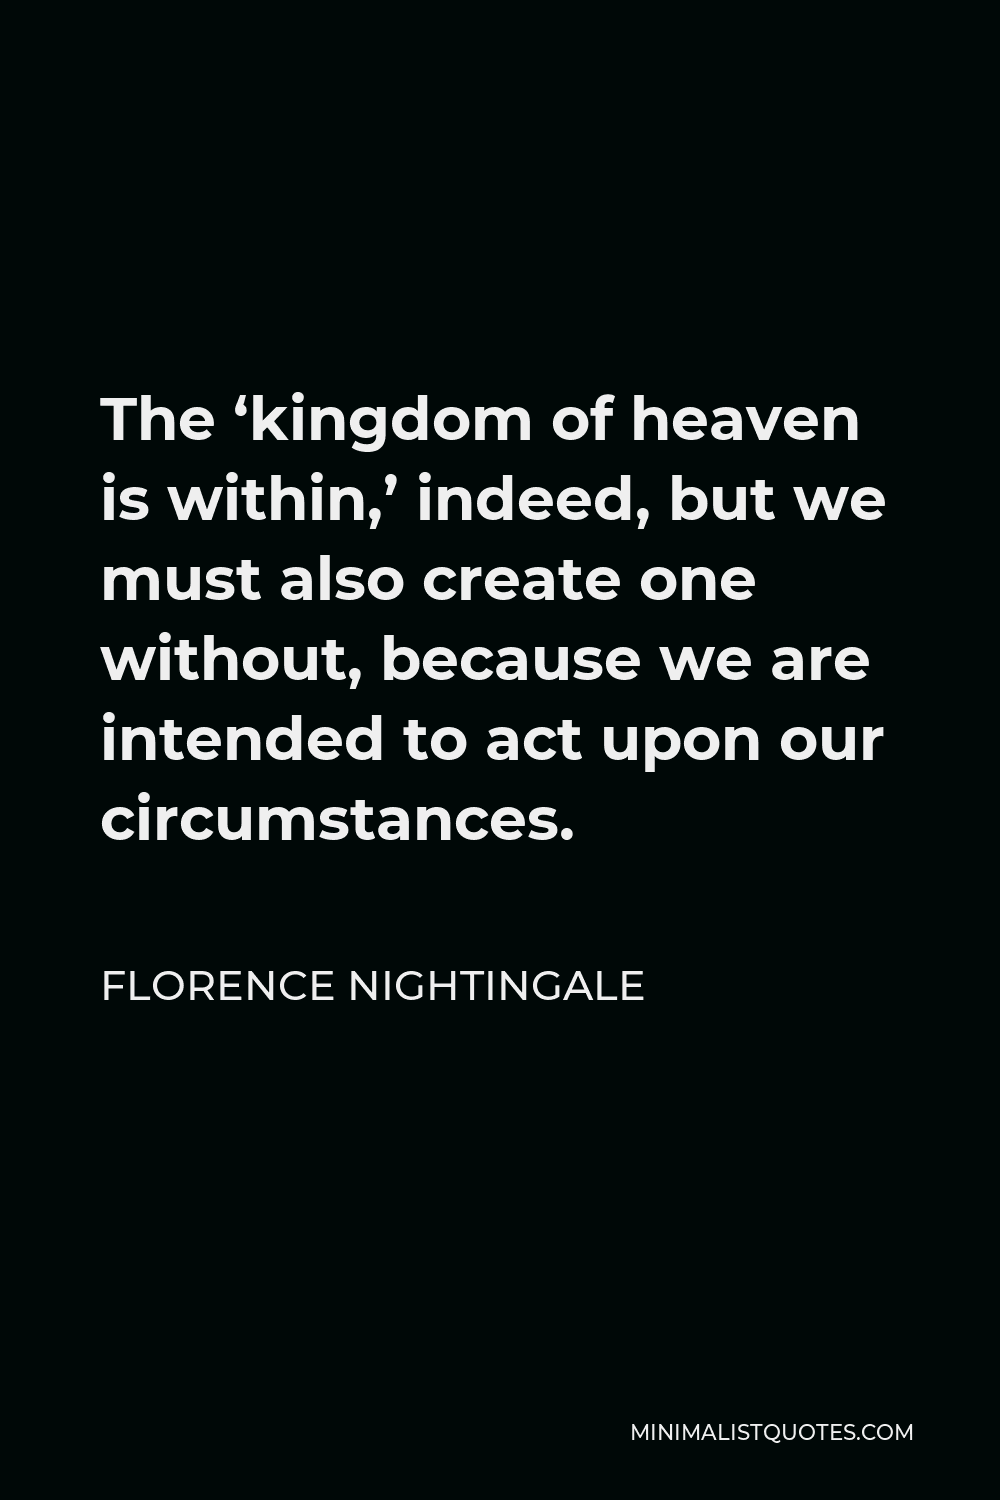 Florence Nightingale Quote - The ‘kingdom of heaven is within,’ indeed, but we must also create one without, because we are intended to act upon our circumstances.